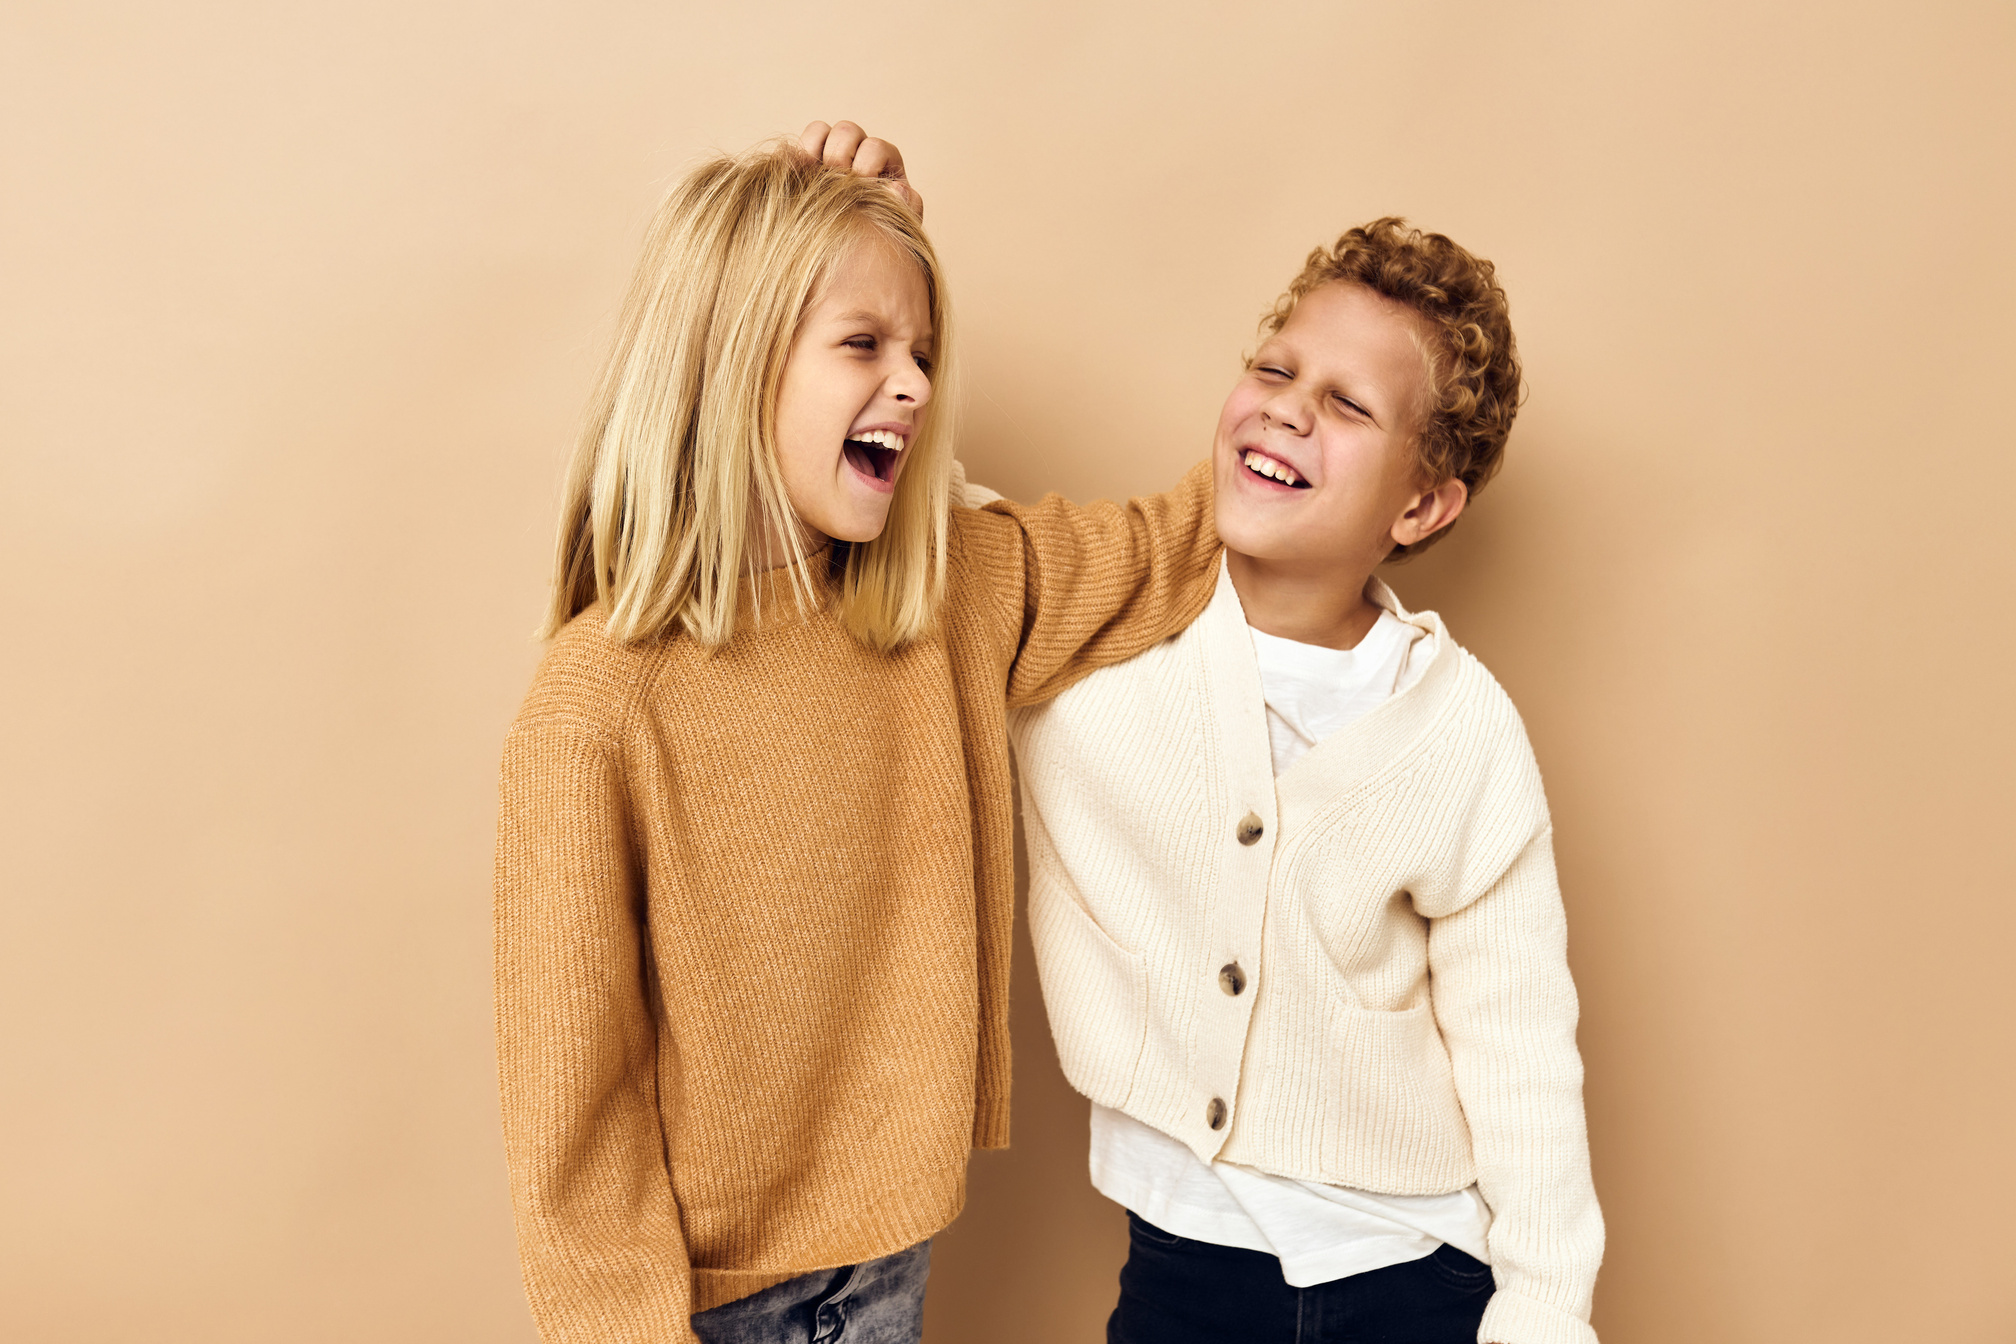 Children Together Fashion Clothes Posing Emotions